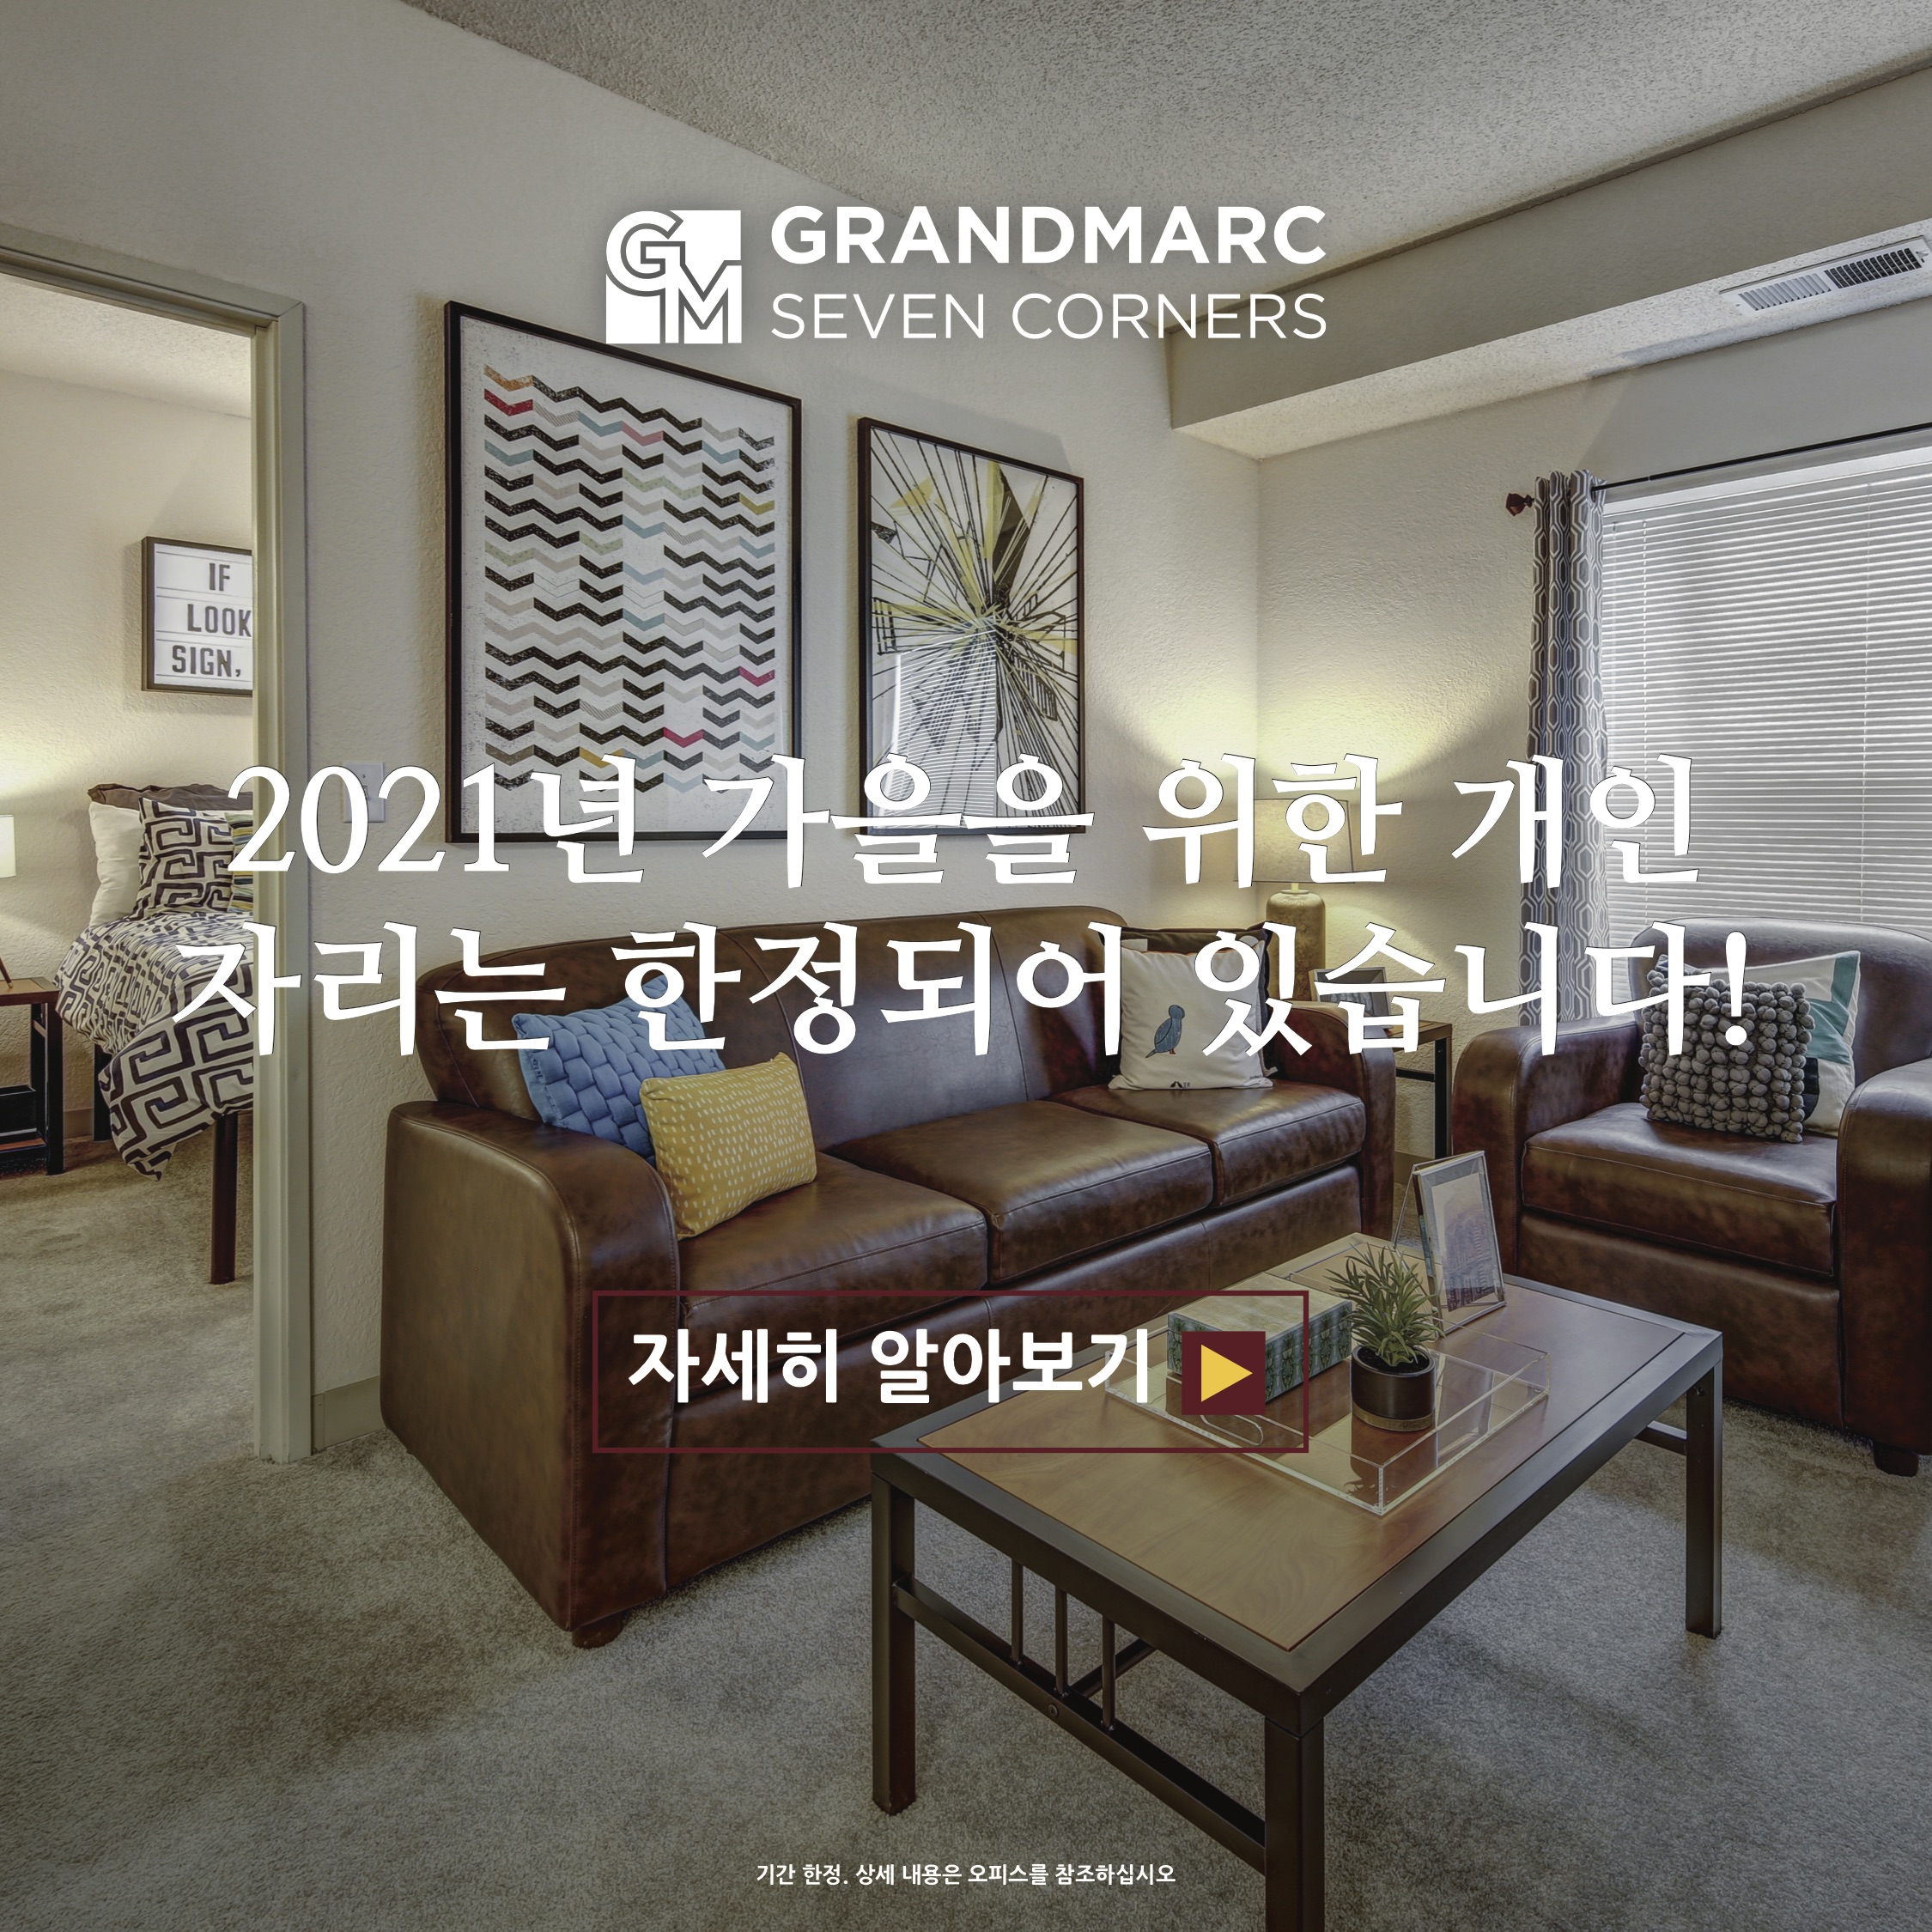 live KOR 310 Limited Spaces Ad 1080x1080 OUTLINED 2.04.21.jpg